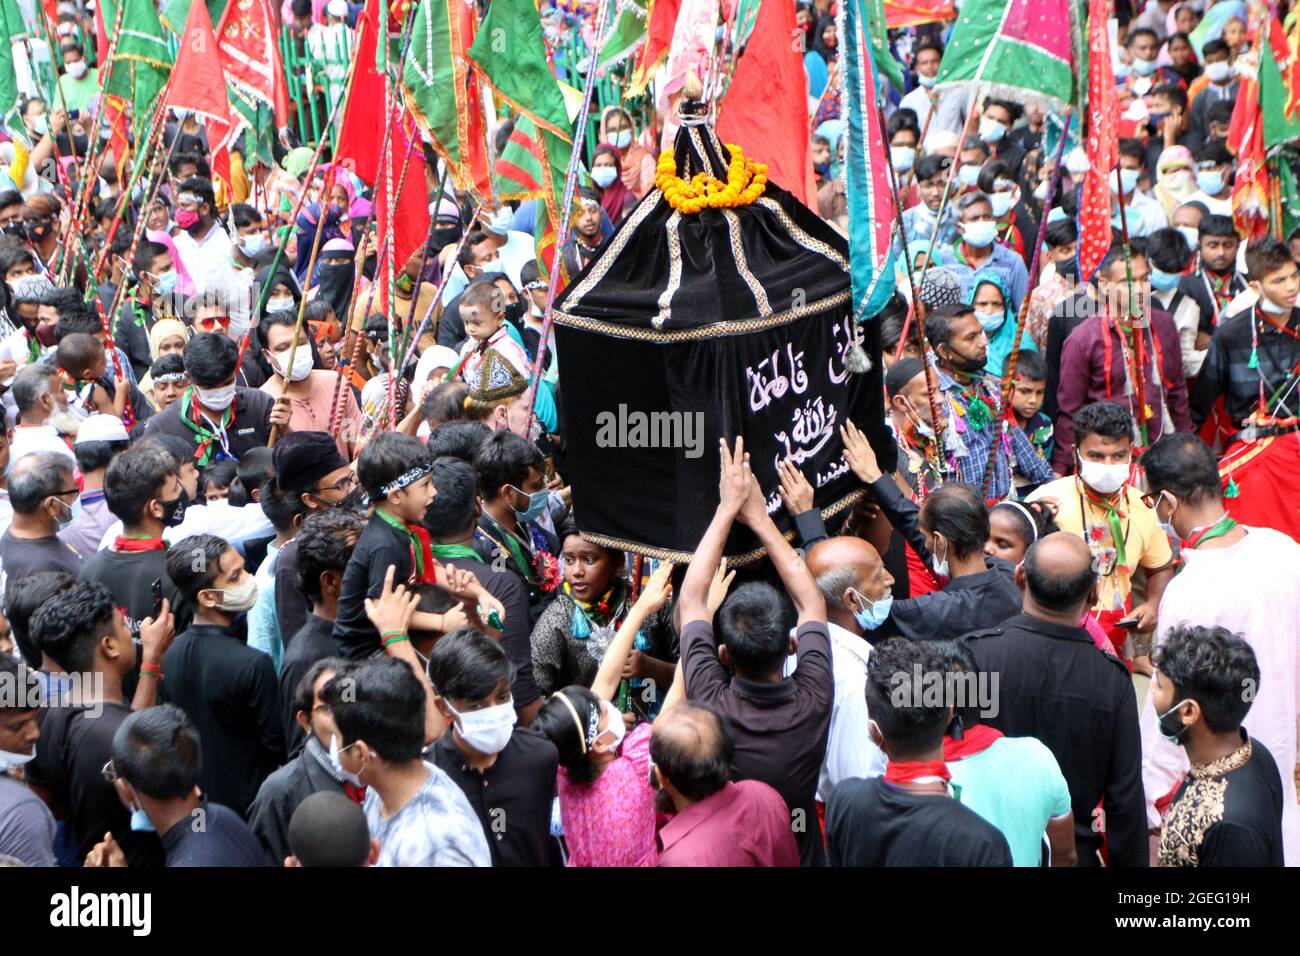 Dhaka, Bangladesh. 20th Aug, 2021. The tenth day of Muharram is celebrated as Ashura, Shia muslims celebrate the day as mourning day for recalling the martyrdom of Prophet Hazrat Muhammad's grandson Hazrat Imam Hussain, his relatives and 72 supporters during the clash of Karbala on this day in the Hijri year of 61. To recognize the day, consistently, Shias bring out customary parade known as Tazia in various regions of Bangladesh, including capital Dhaka. Credit: Abaca Press/Alamy Live News Stock Photo